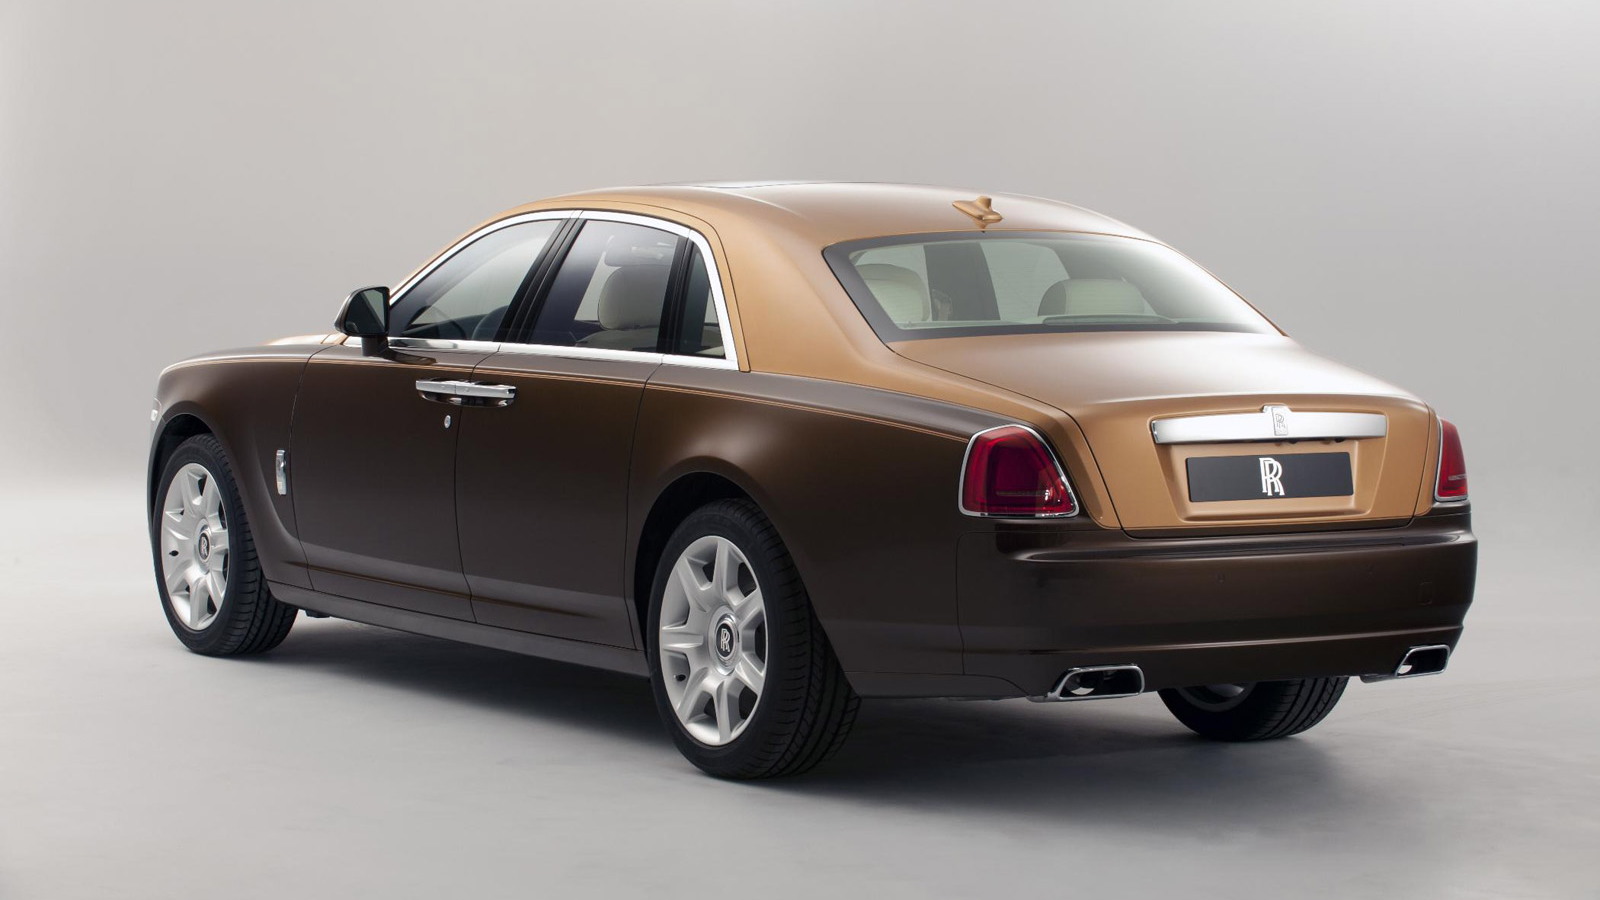 2012 Rolls-Royce Ghost with two-tone option